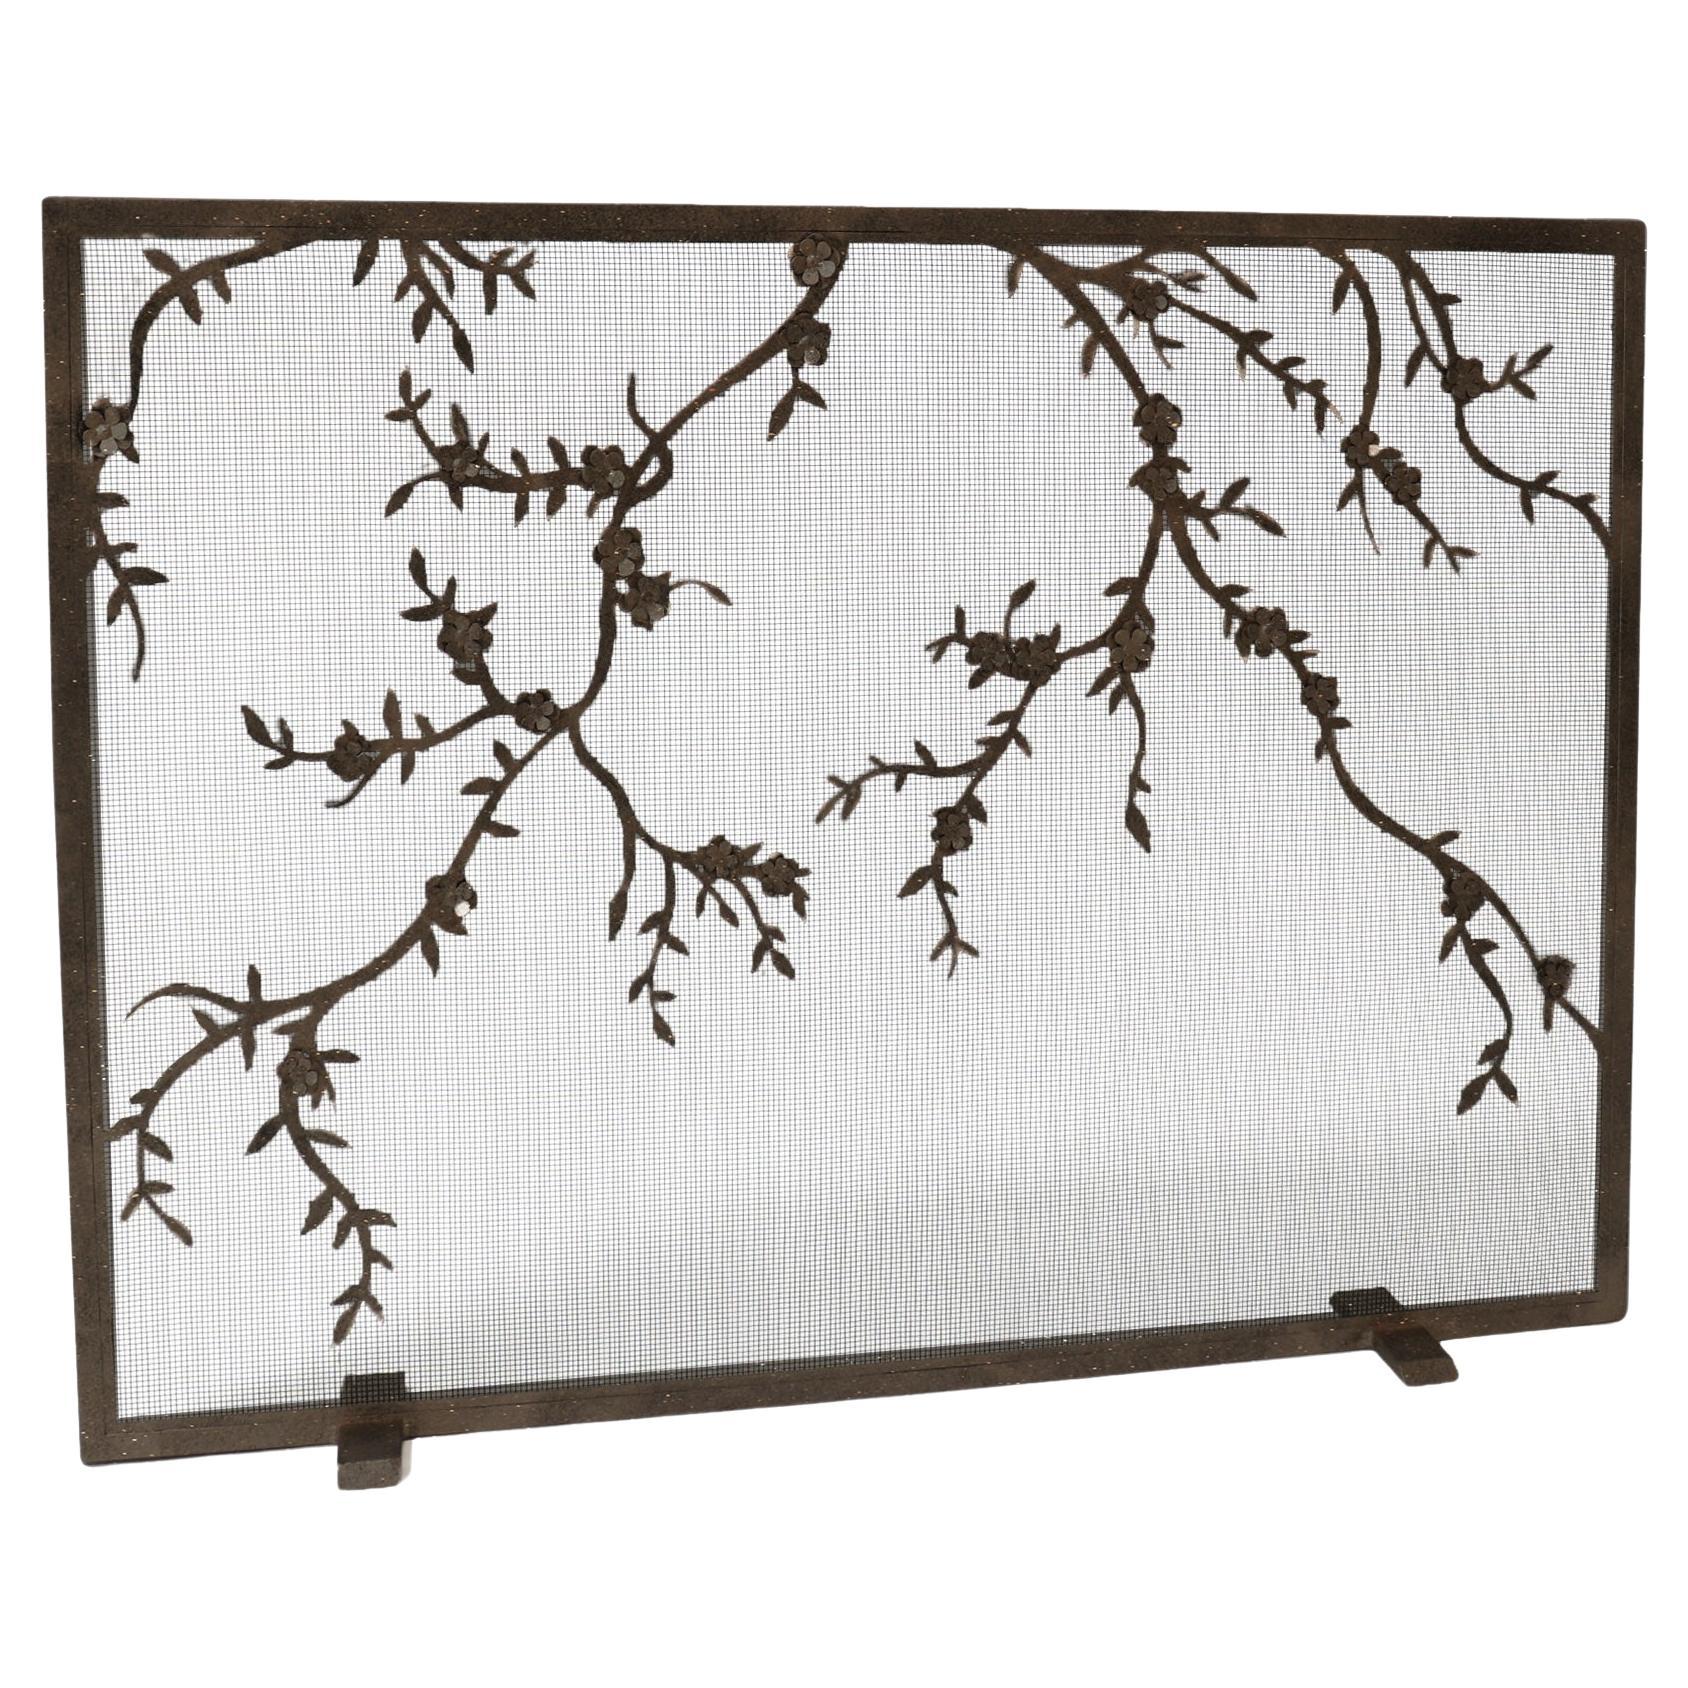 Plum Blossom Fireplace Screen in Warm Black For Sale